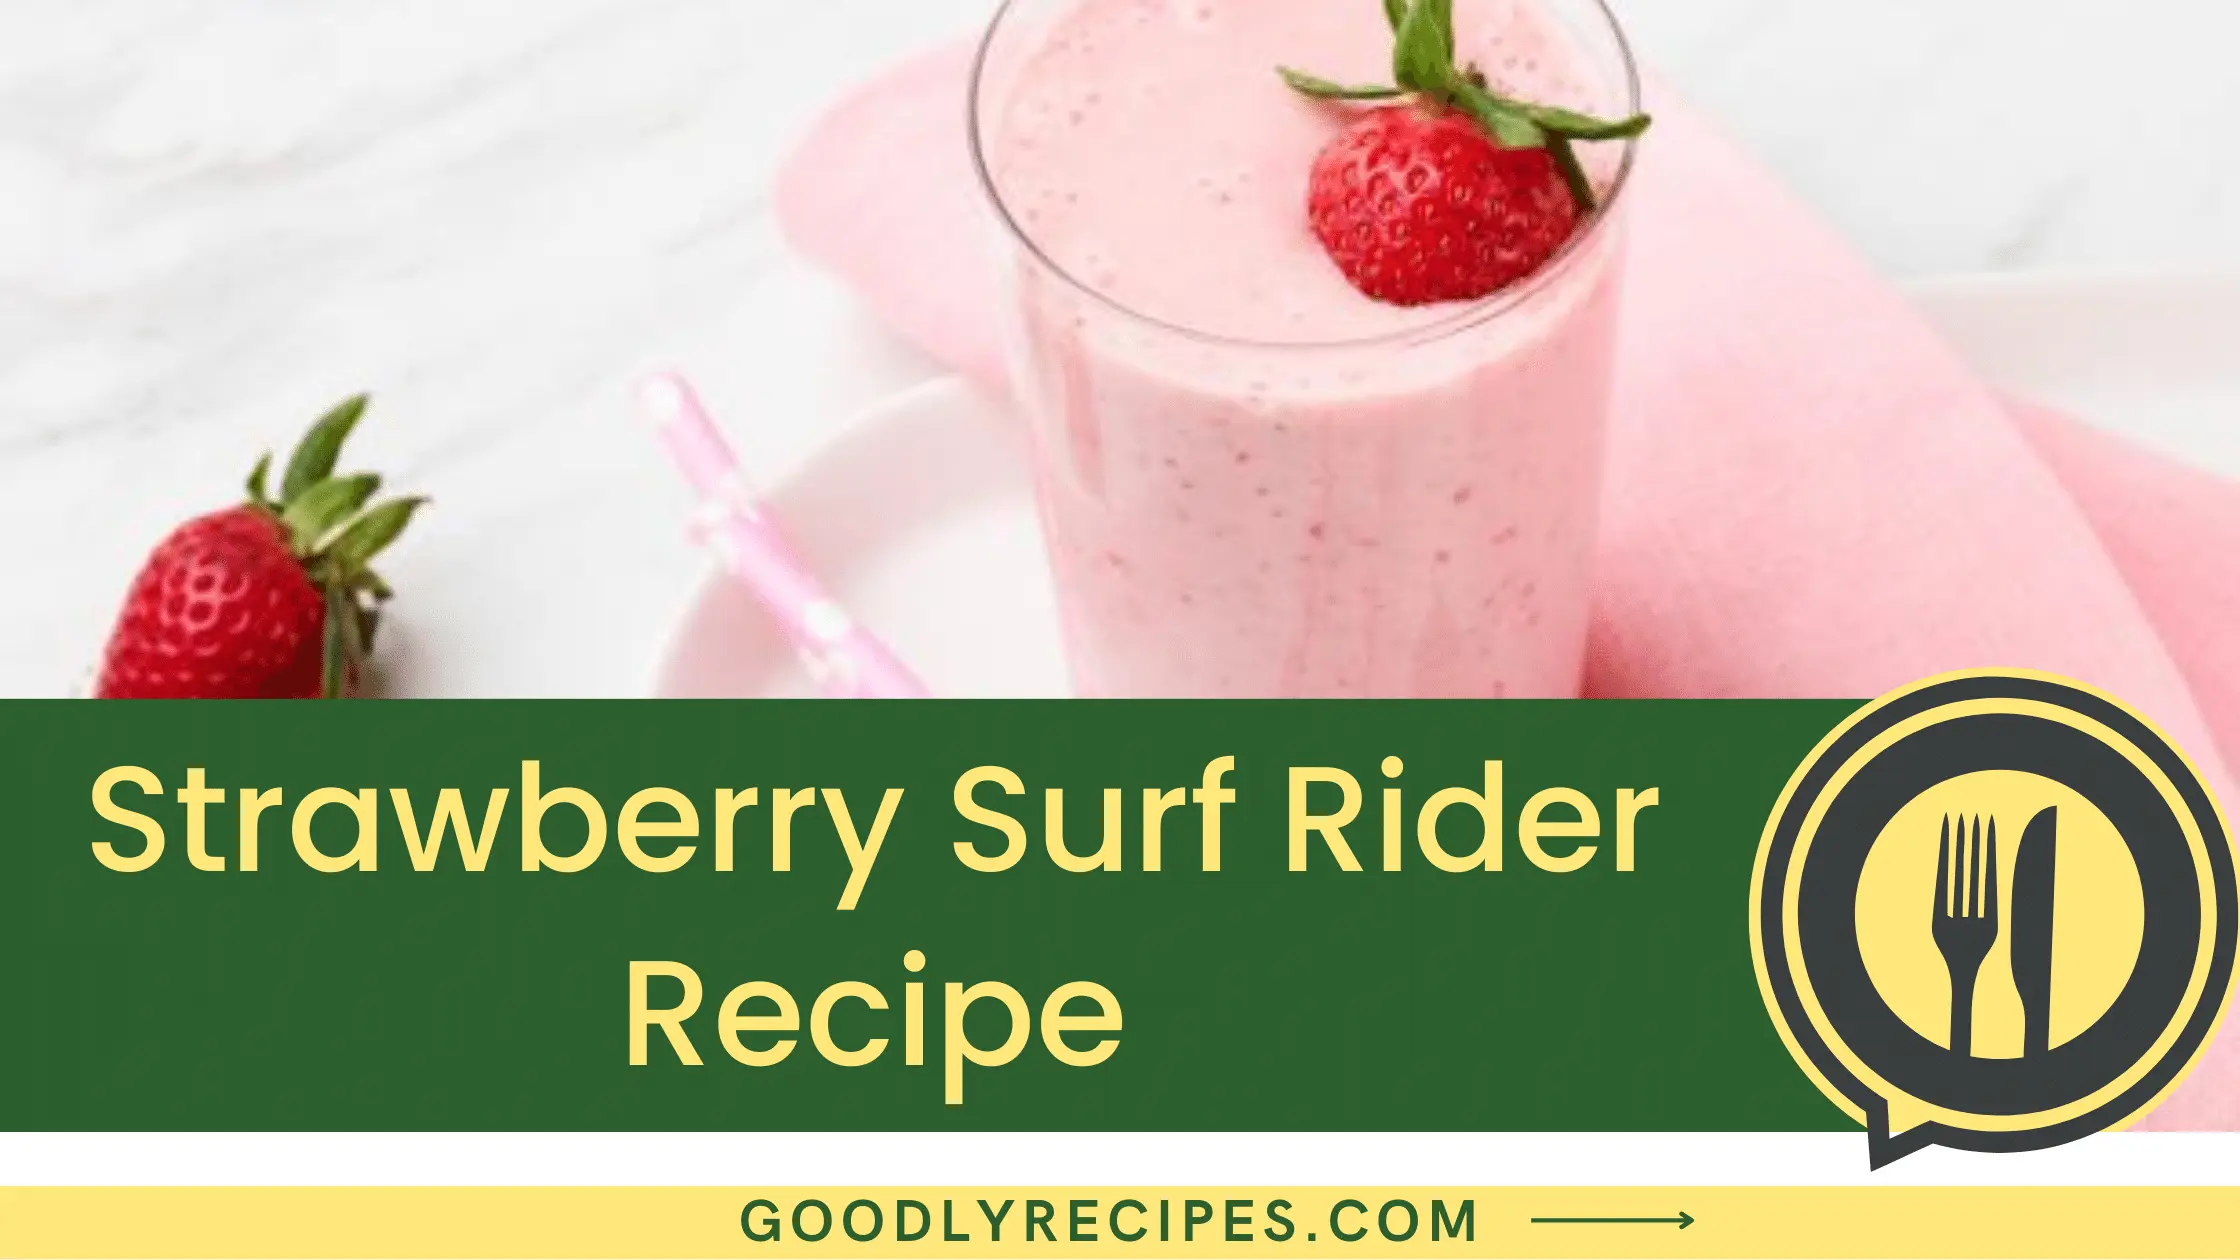 Strawberry Surf Rider Recipe - For Food Lovers